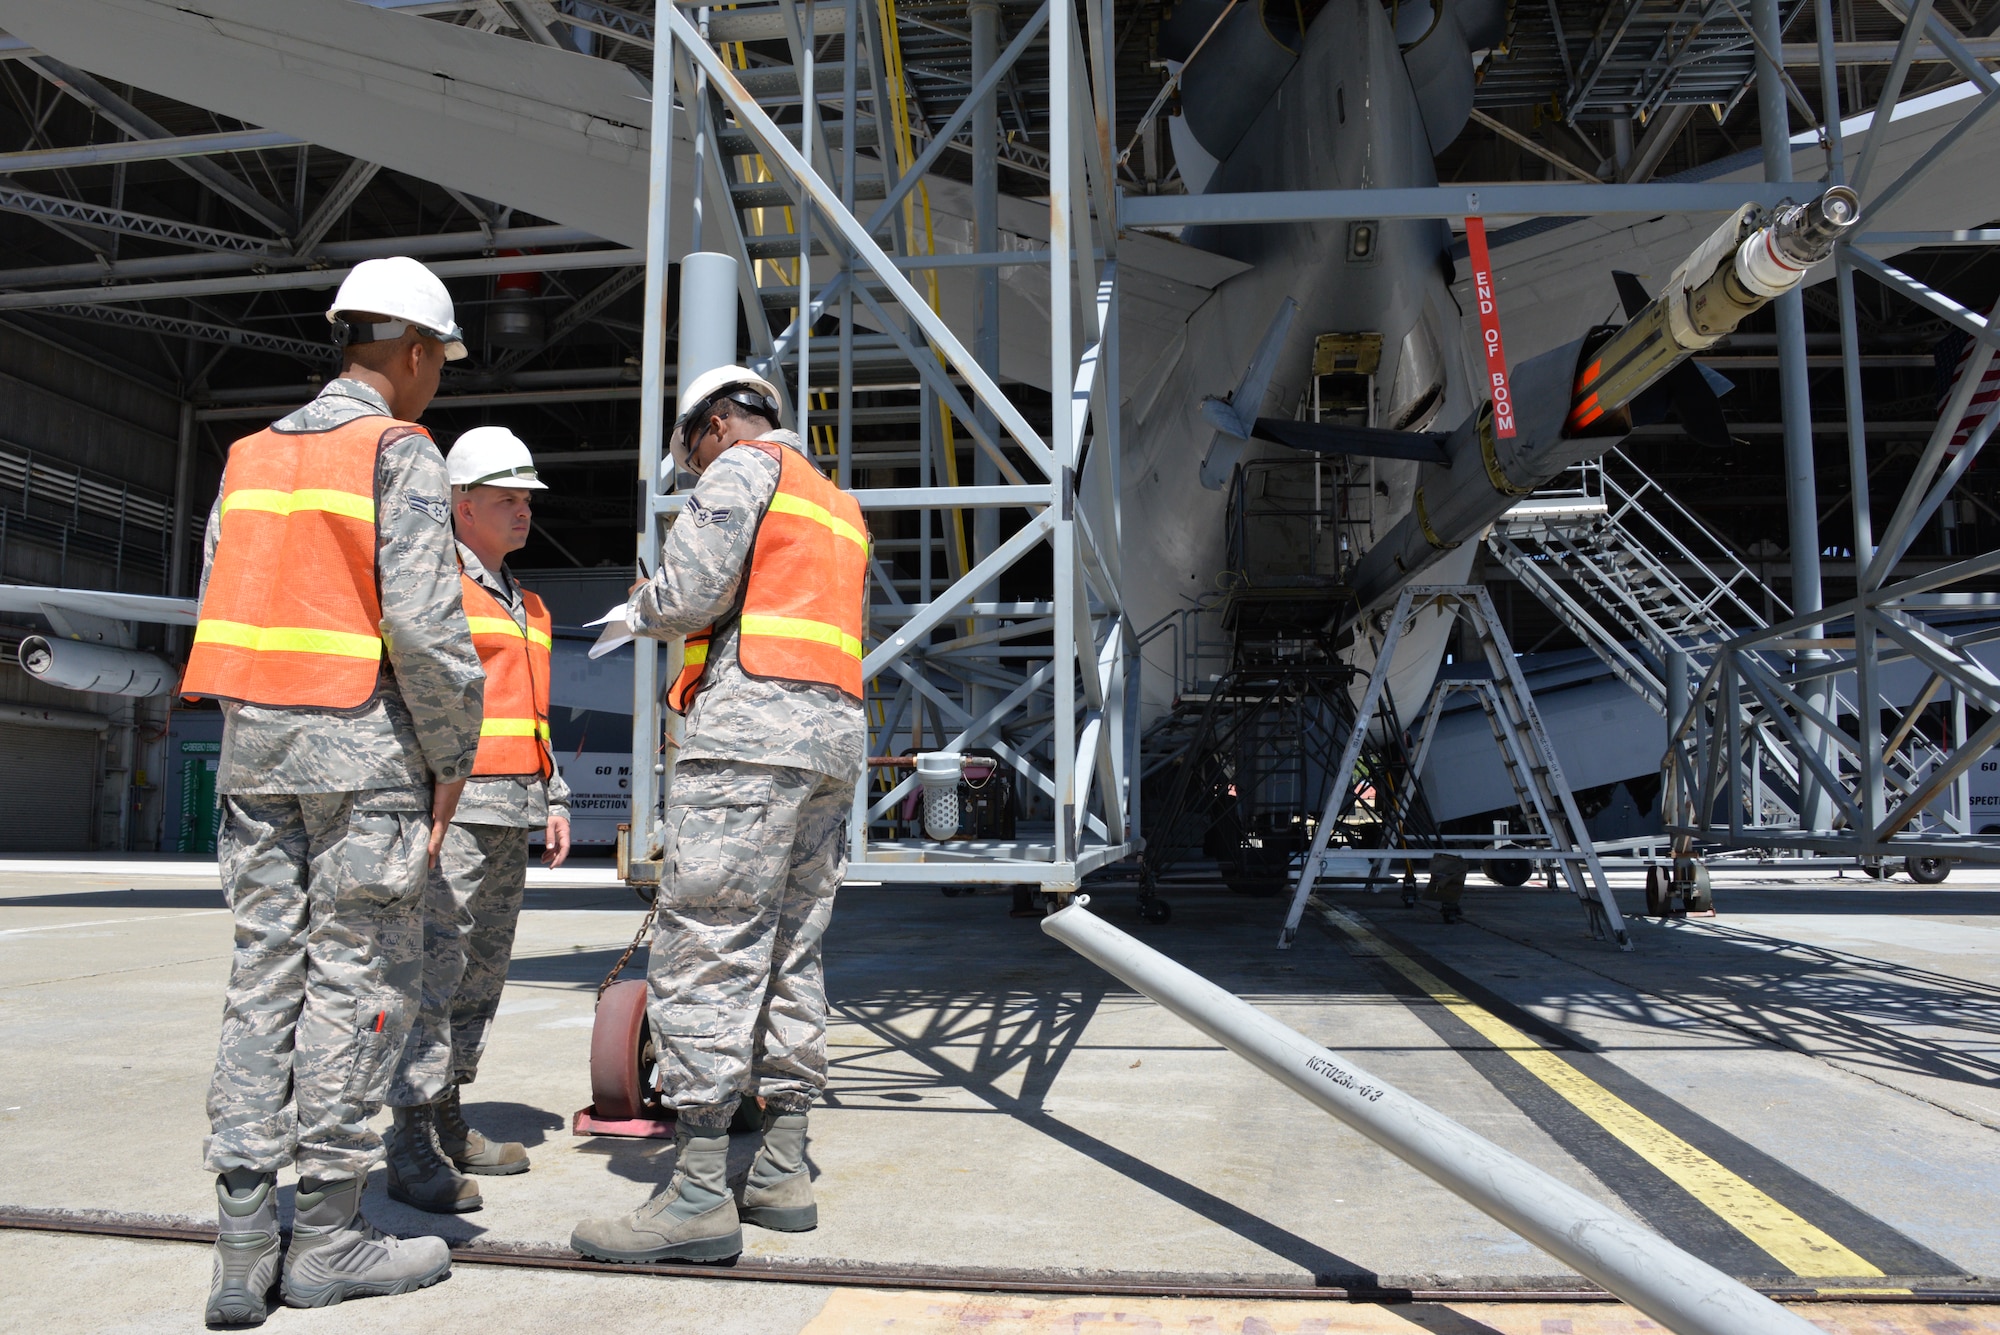 A three-man team perform inspections as part of the Phoenix Pride Program April 18 at Travis Air Force Base, Calif. Airman 1st Class Jamal White, aero repair technician, left, Staff Sgt. Adam Hite, metals technology craftsman, center, and Airman 1st Class Eric Lambert, section team member, right, from the 60th Maintenance Squadron, work together to use their individual expertise to uncover items that need correcting throughout the 18 different work centers. (U.S. Air Force photo by Senior Airman Amber Carter)